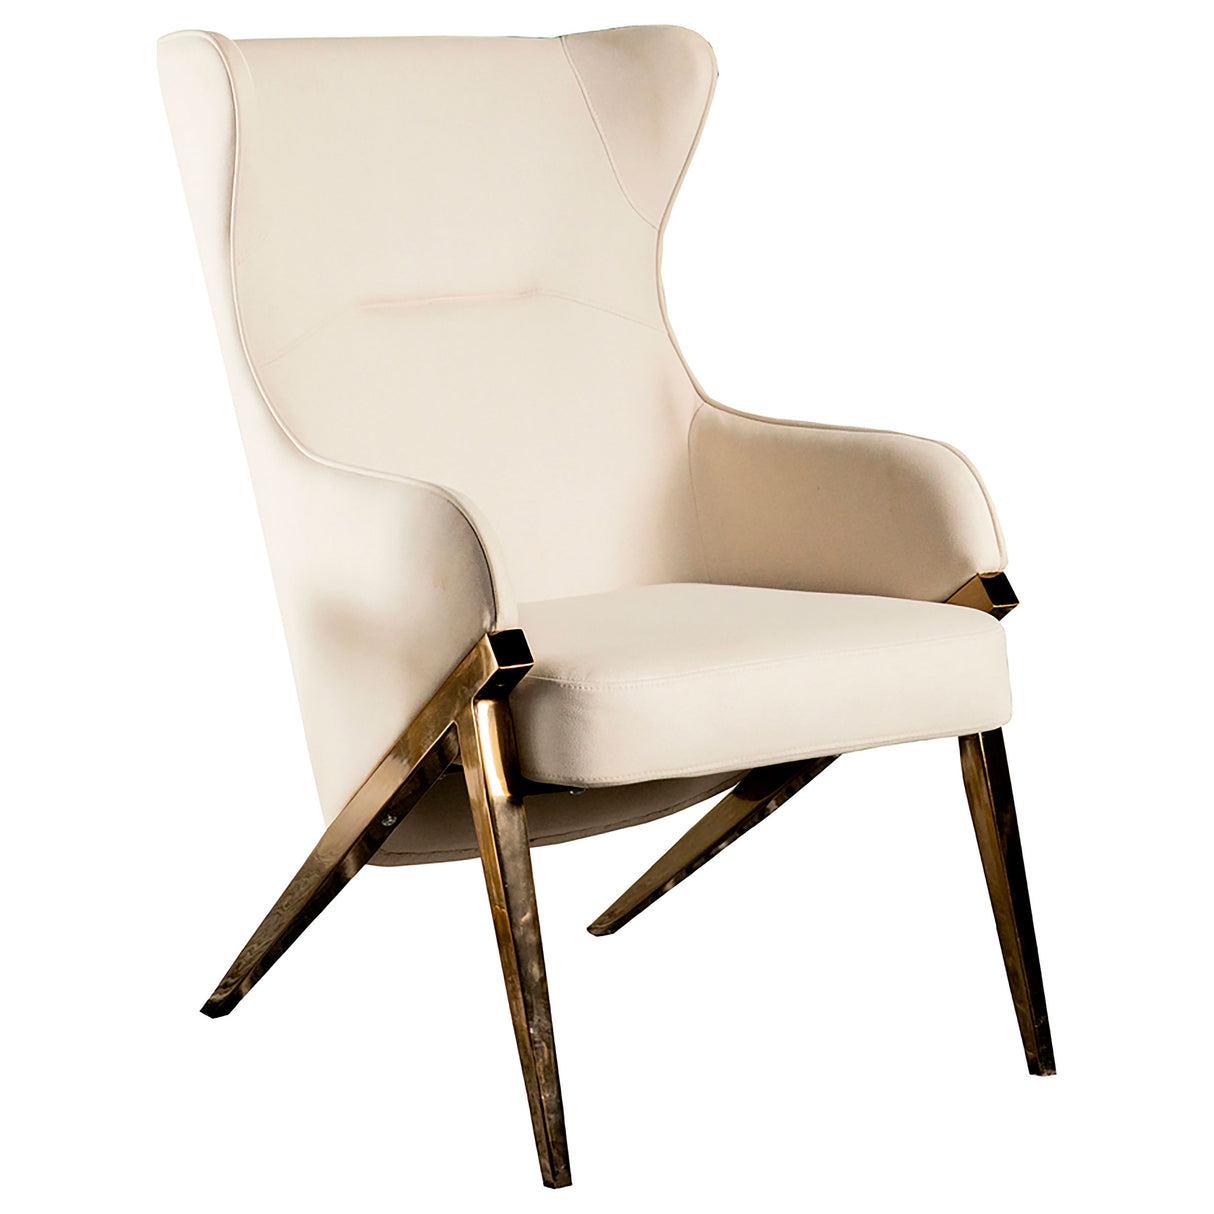 Accent Chair - Walker Upholstered Accent Chair Cream and Bronze